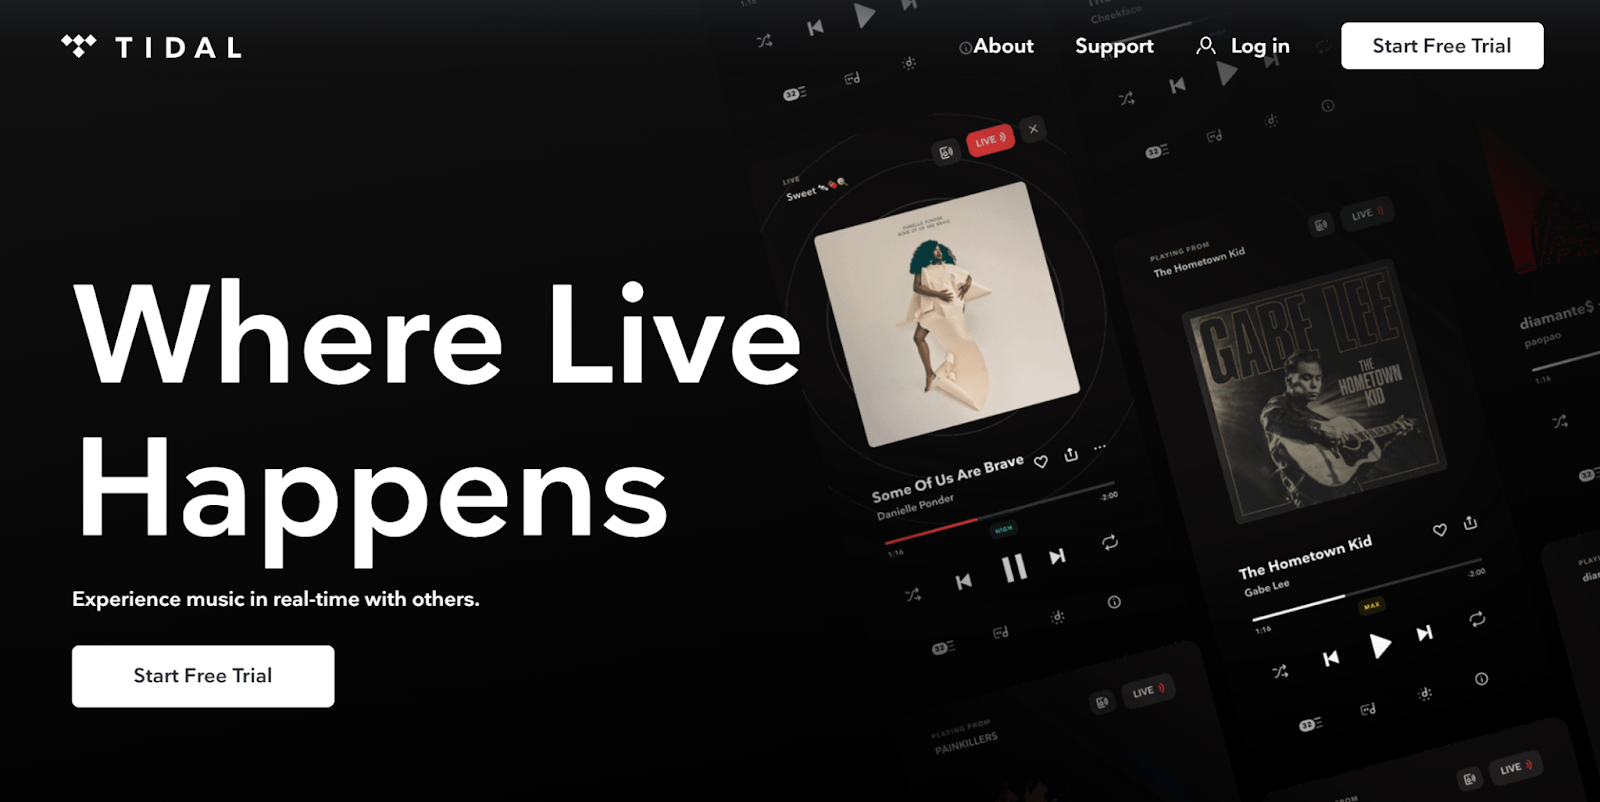 Tidal website home page